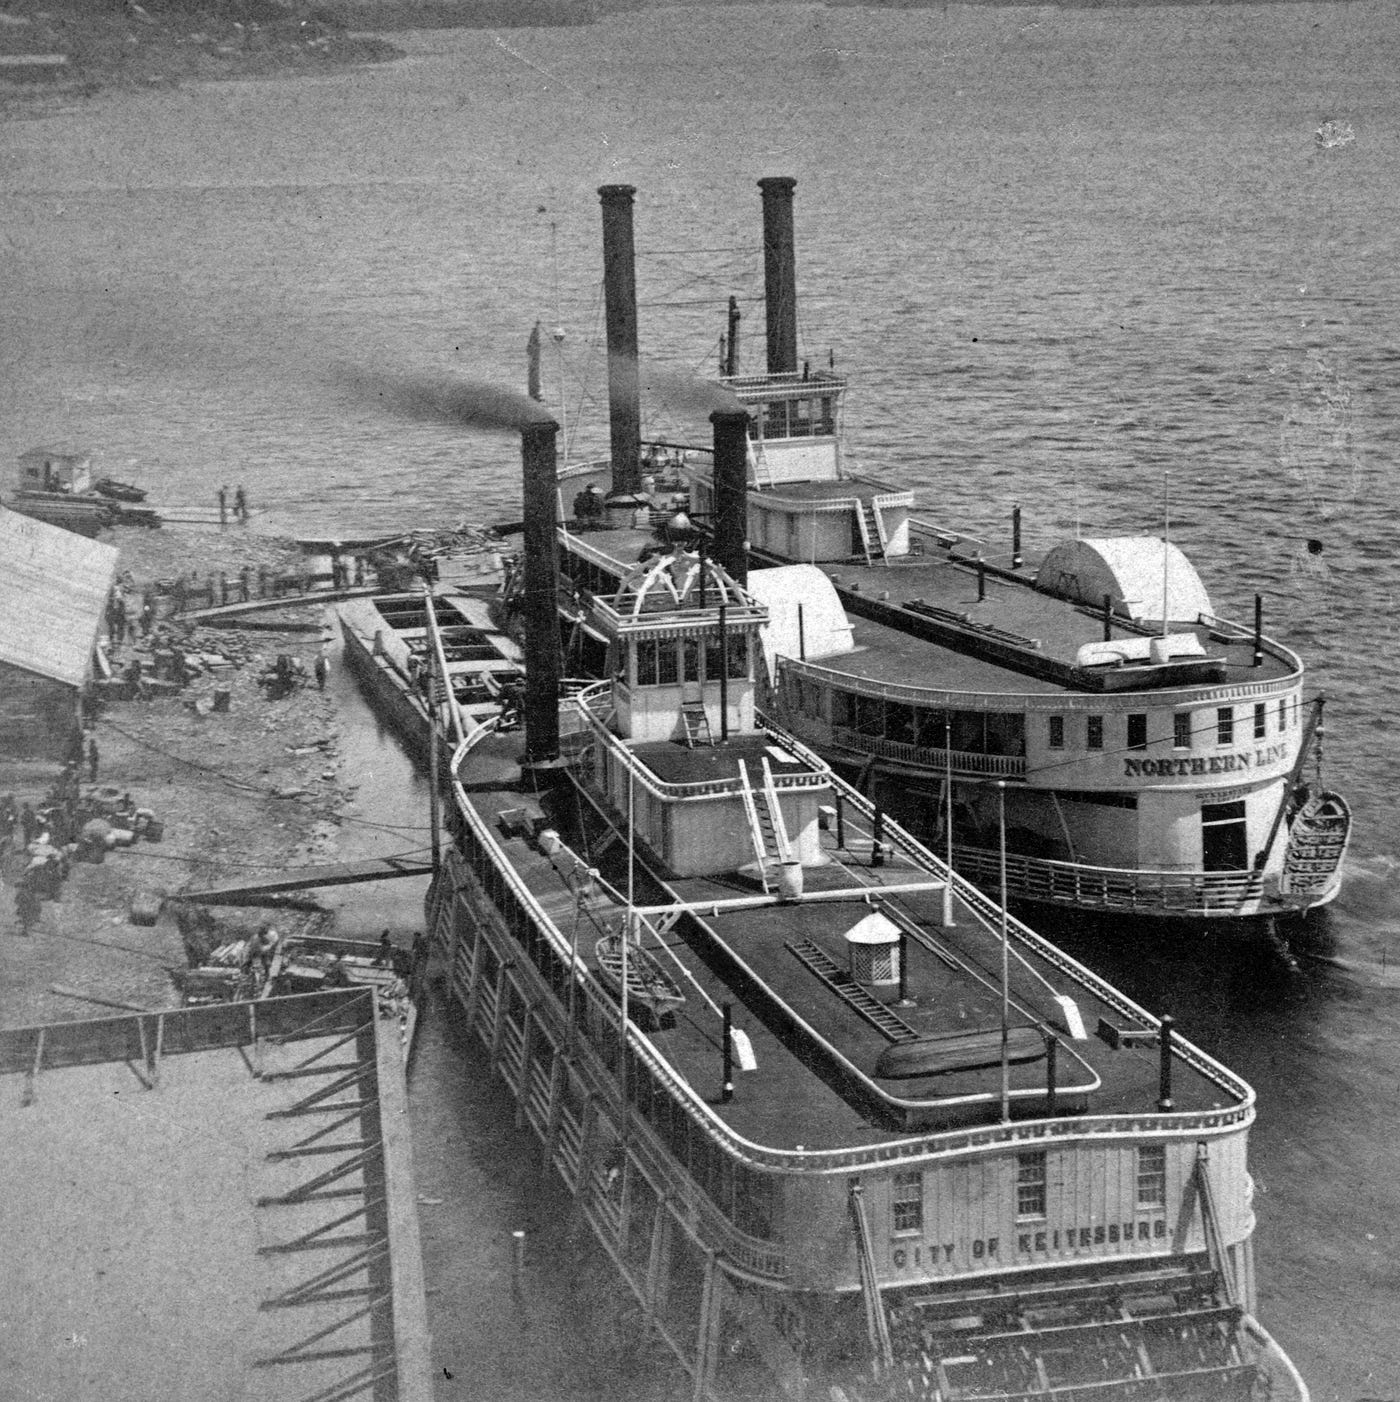 After a Steamboat Scuffle, Ripple Effects for Civil Rights by Iowa Culture Iowa History Medium